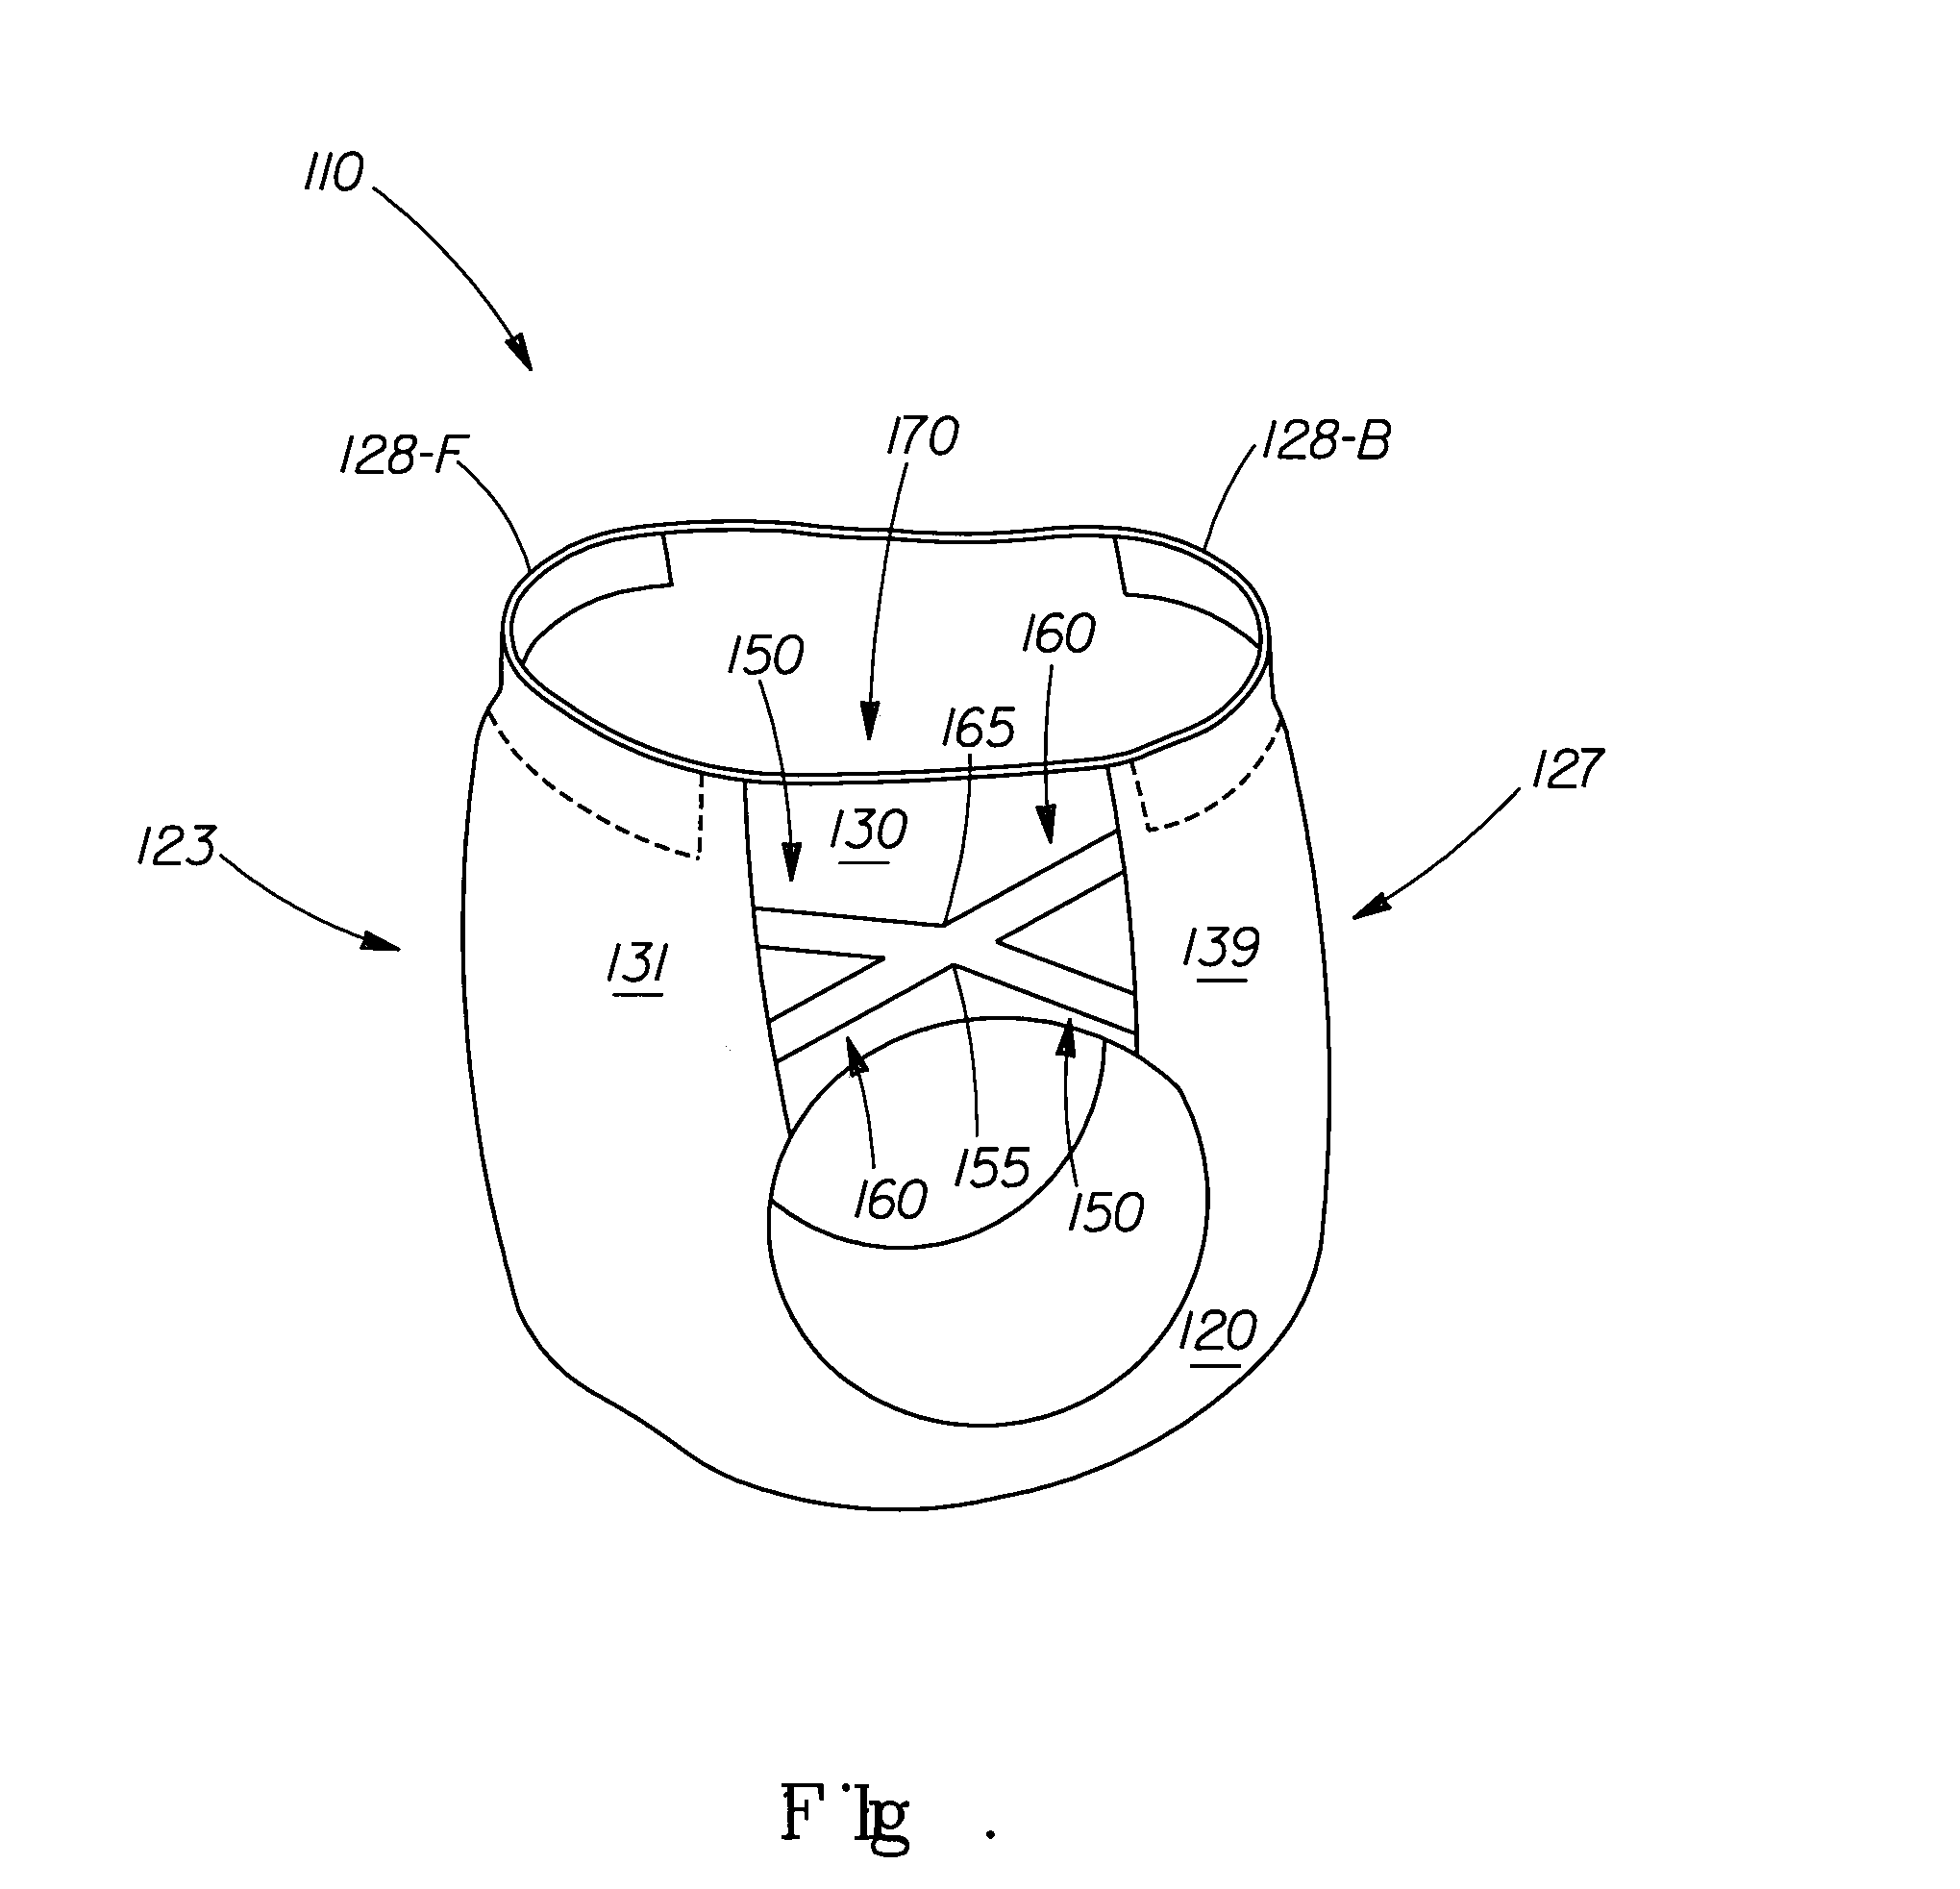 Disposable wearable absorbent articles with anchoring subsystems